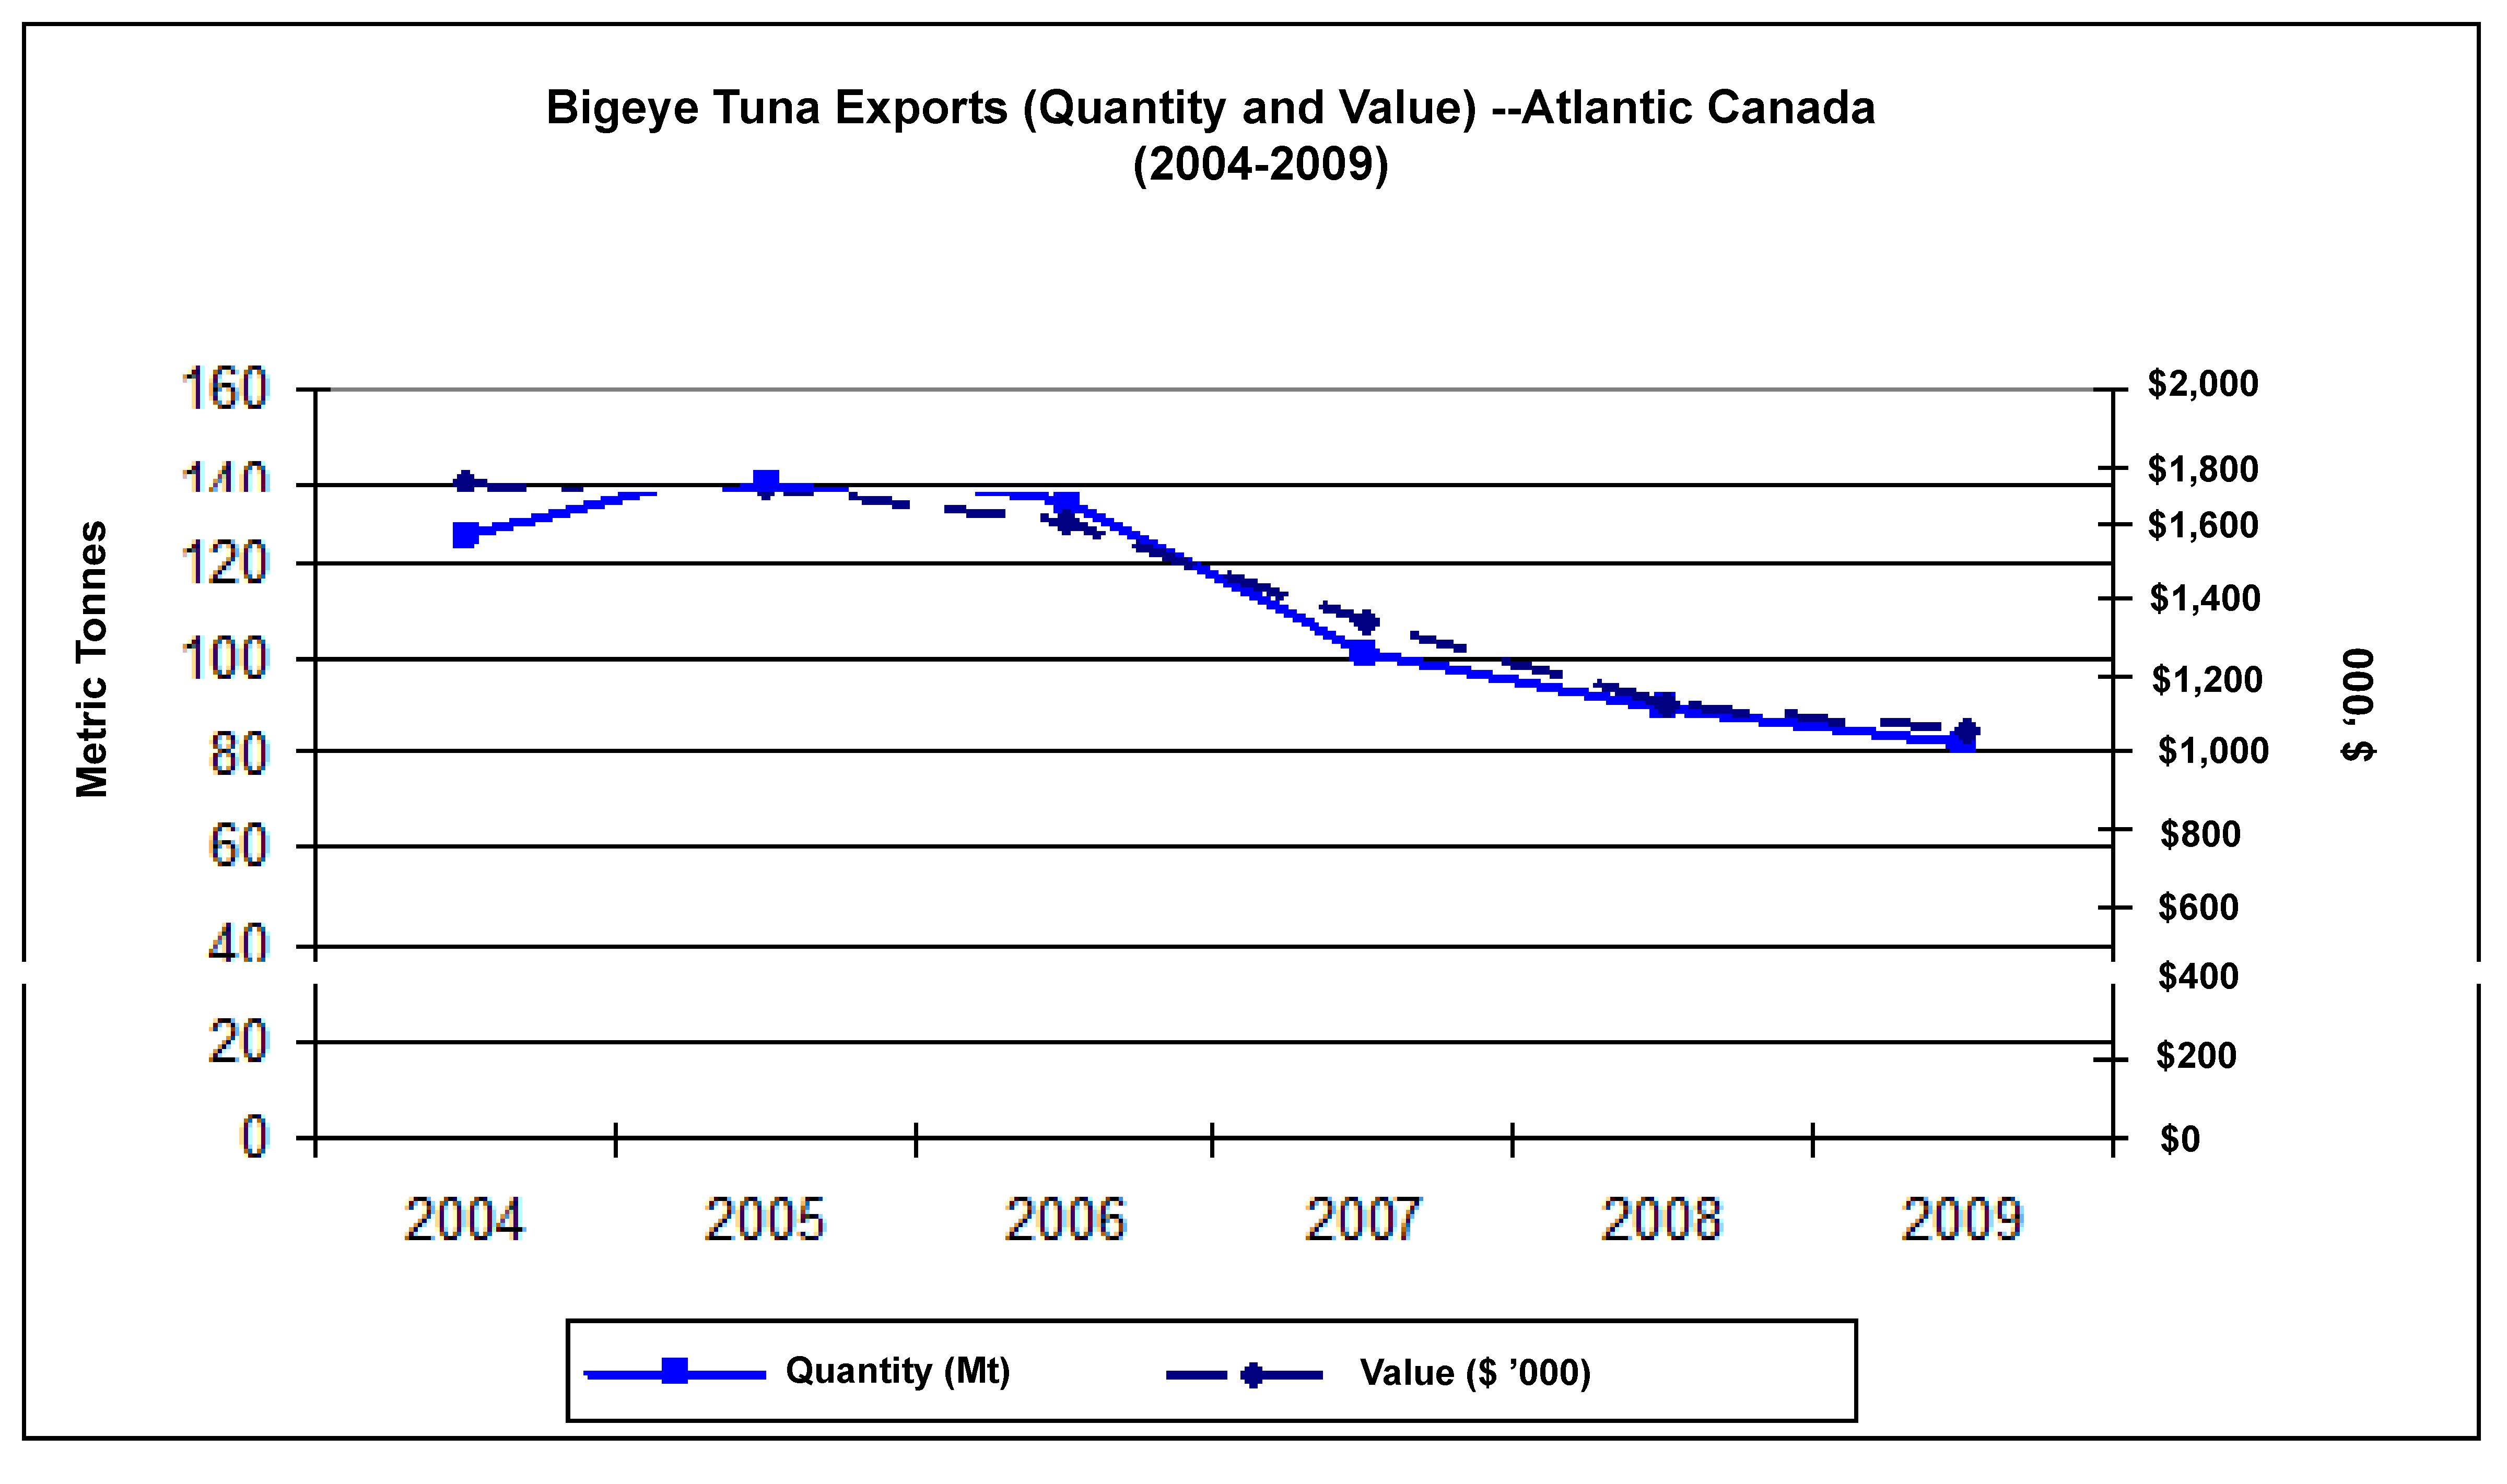 Figure of quantity and value of Bigeye Tuna exports